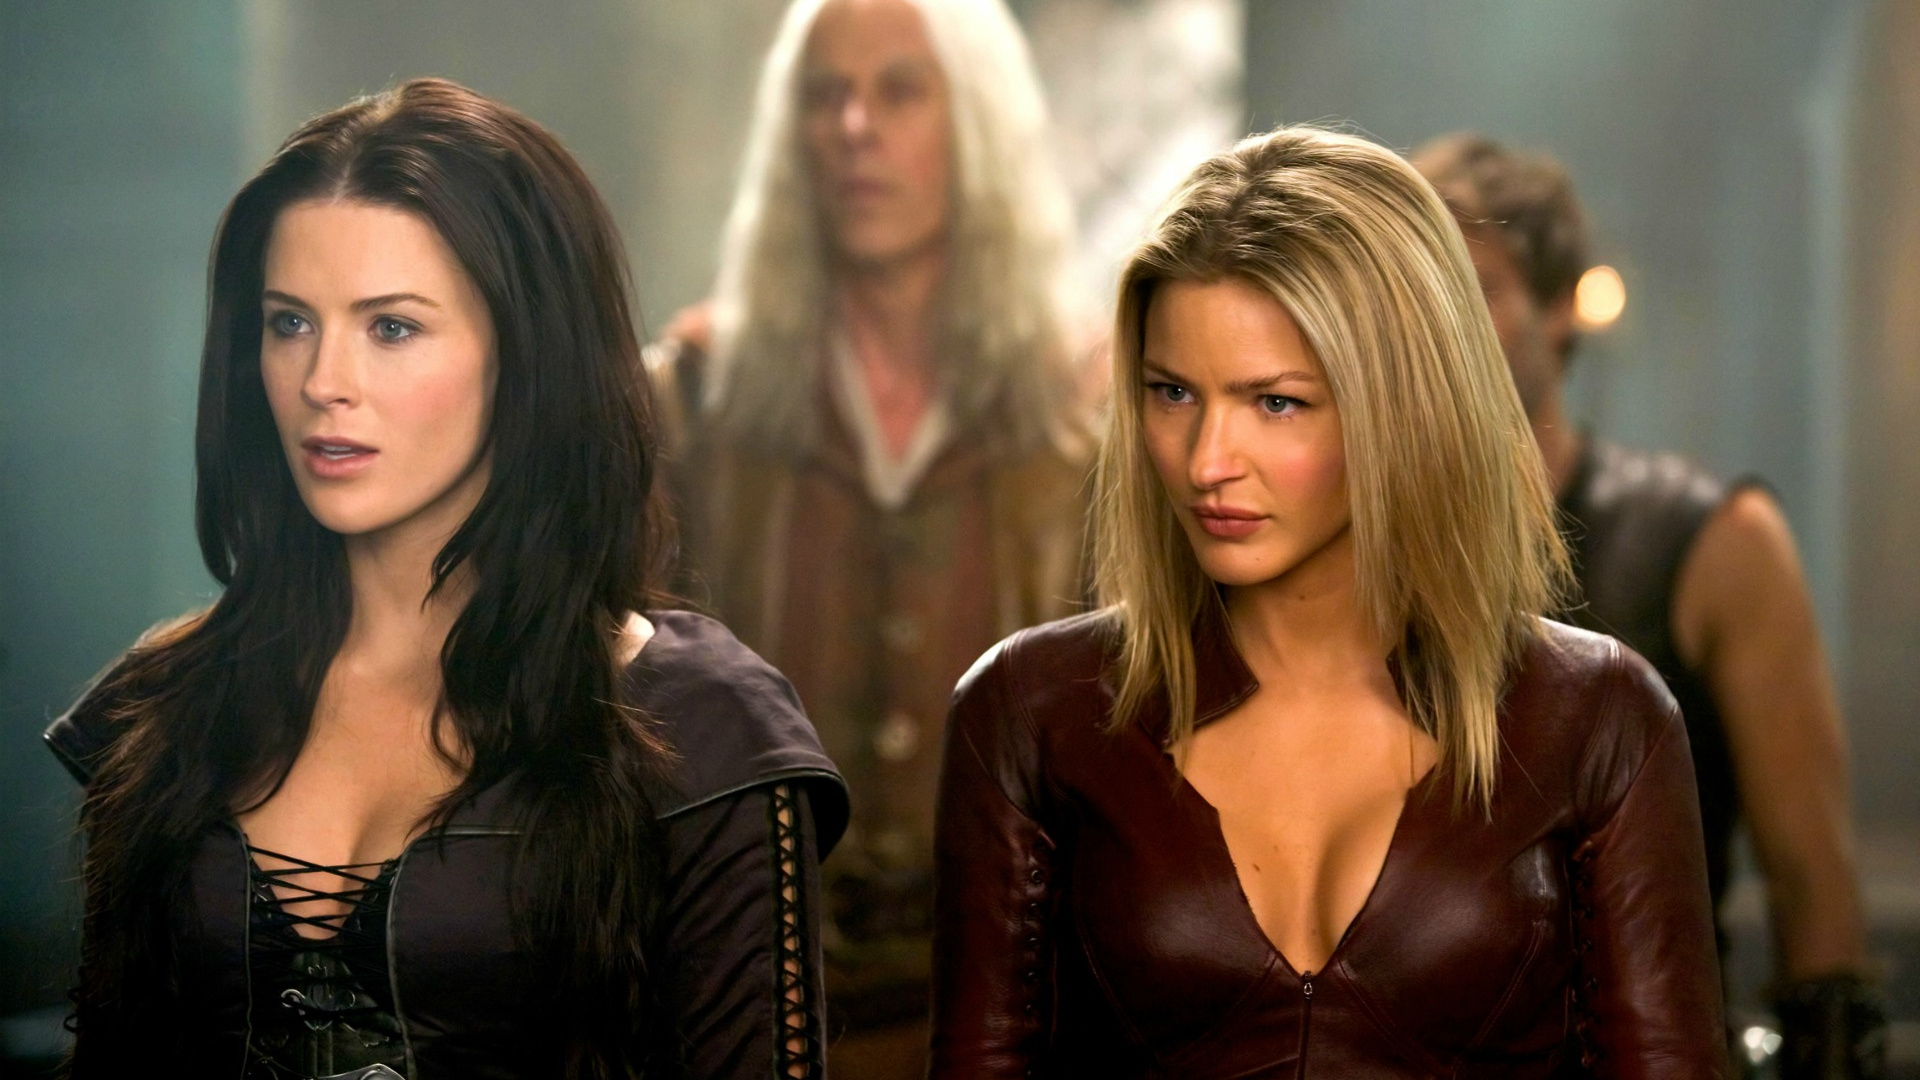 Legend of the Seeker (TV Series): Bridget Regan and Tabrett Bethell, Actresses in the leading roles. 1920x1080 Full HD Background.